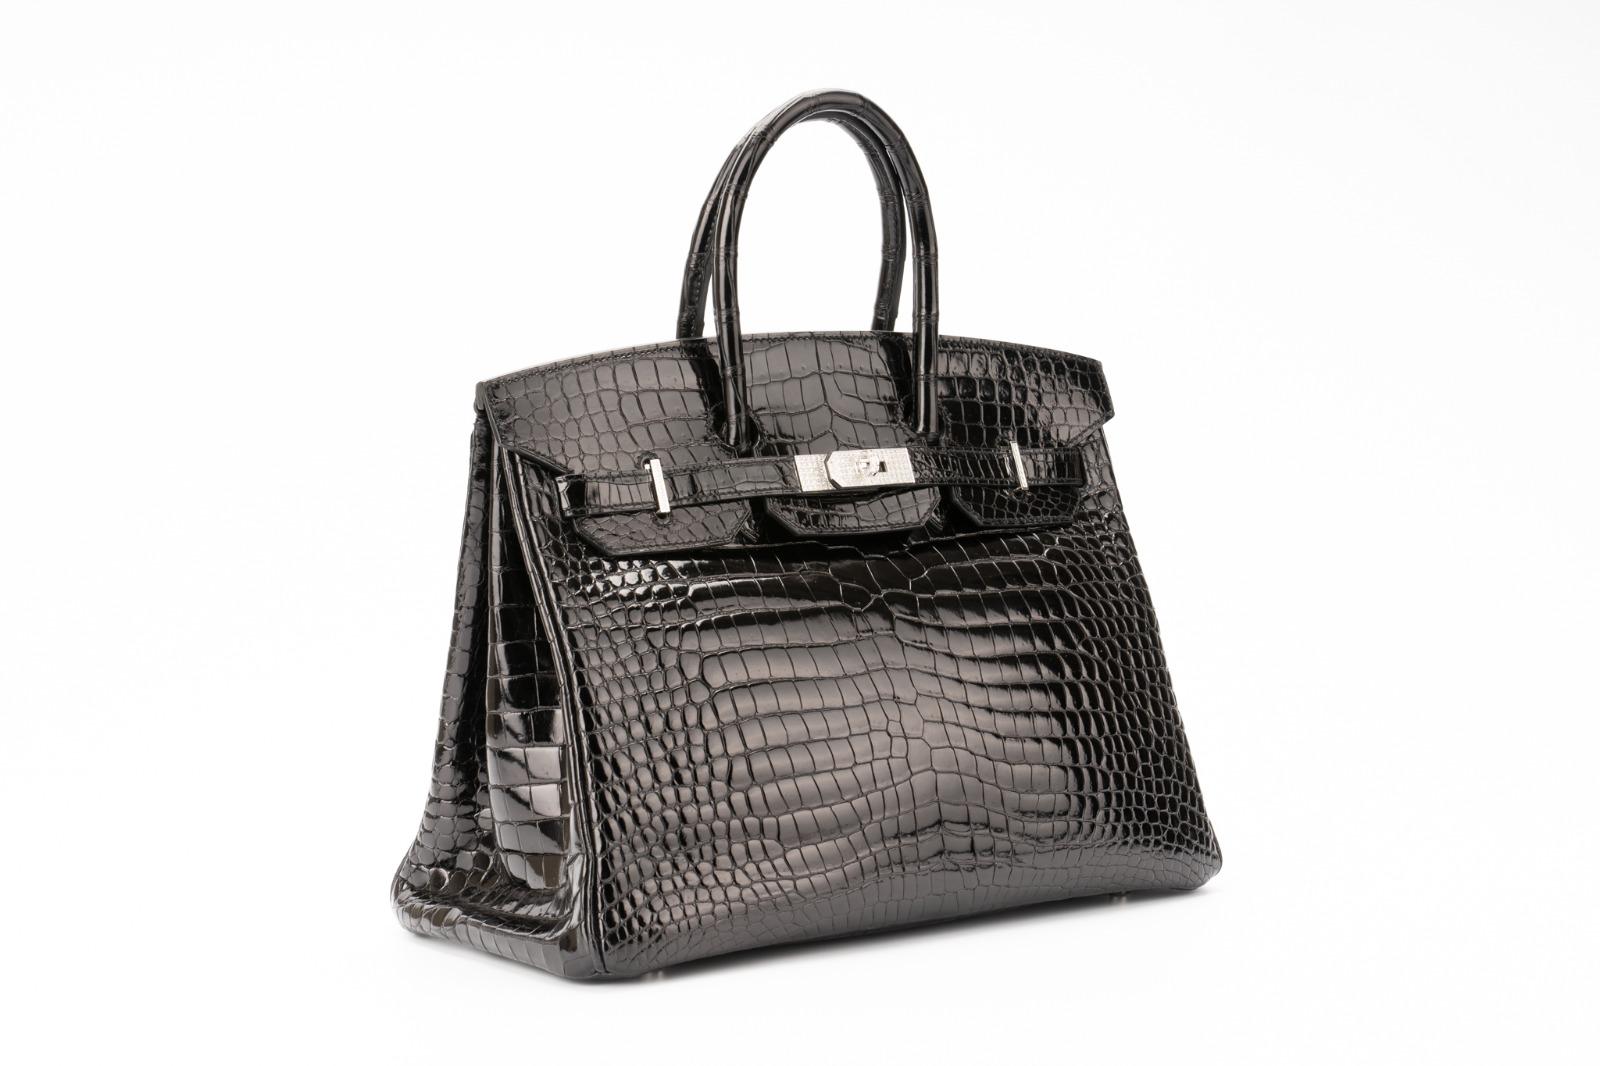 Exceptional Hermes bag, in black Porosus Crocodile with 18K white gold hardware and more than 200 diamonds totaling in approx. 10.70 carats. This iconic handbag is so rare to be found in such an

excellent condition and in the most precious shiny